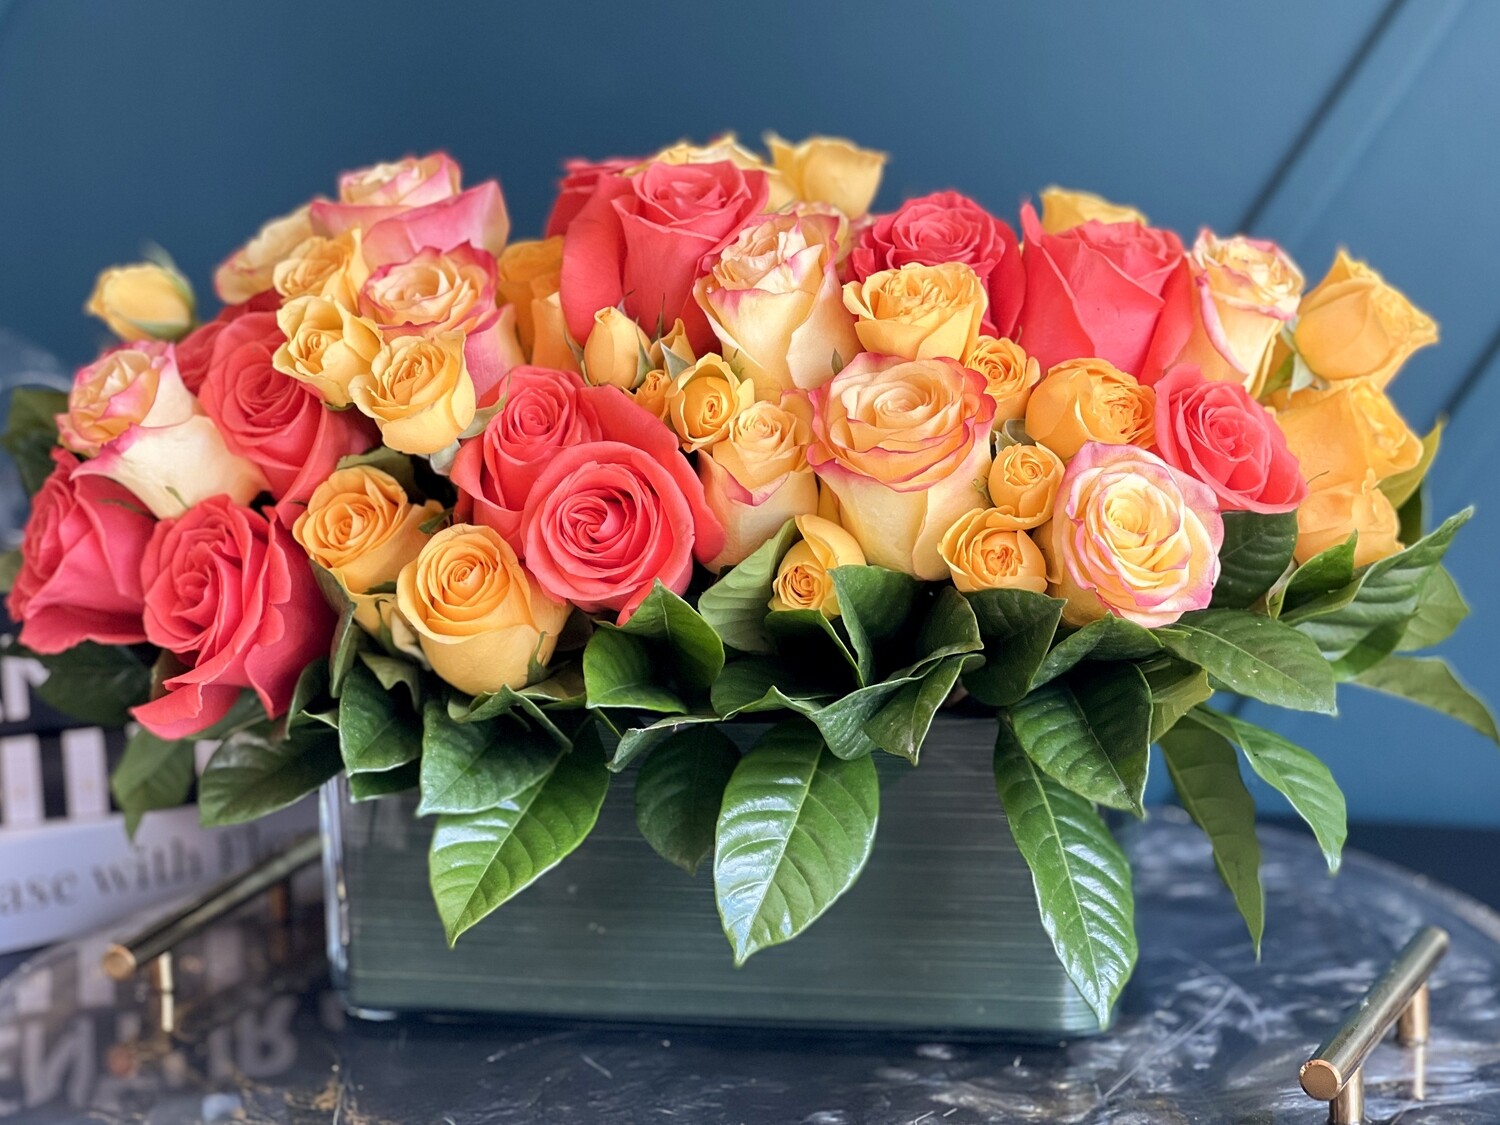 PALLET OF COLOR - MODERN DESIGN WITH ROSES